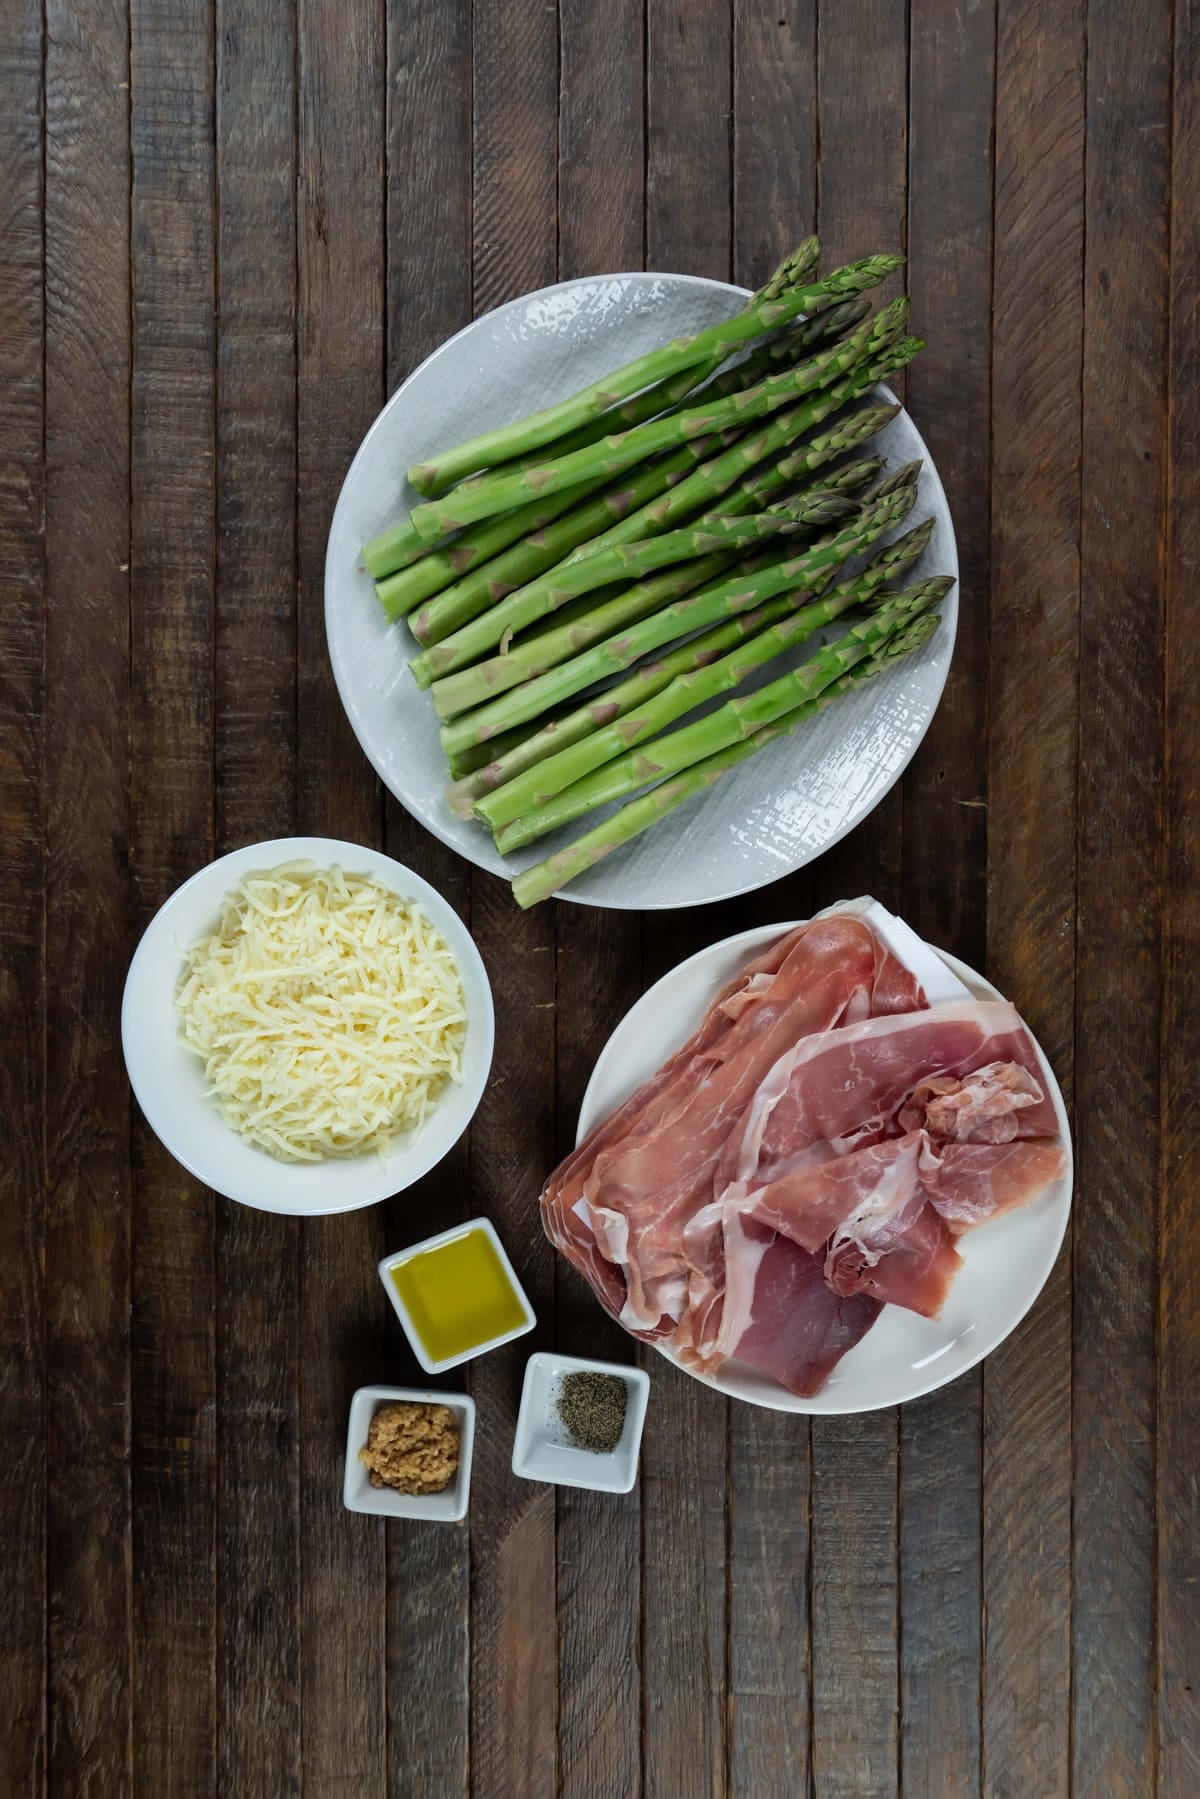 Cheesy baked asparagus ingredients gathered on a table.